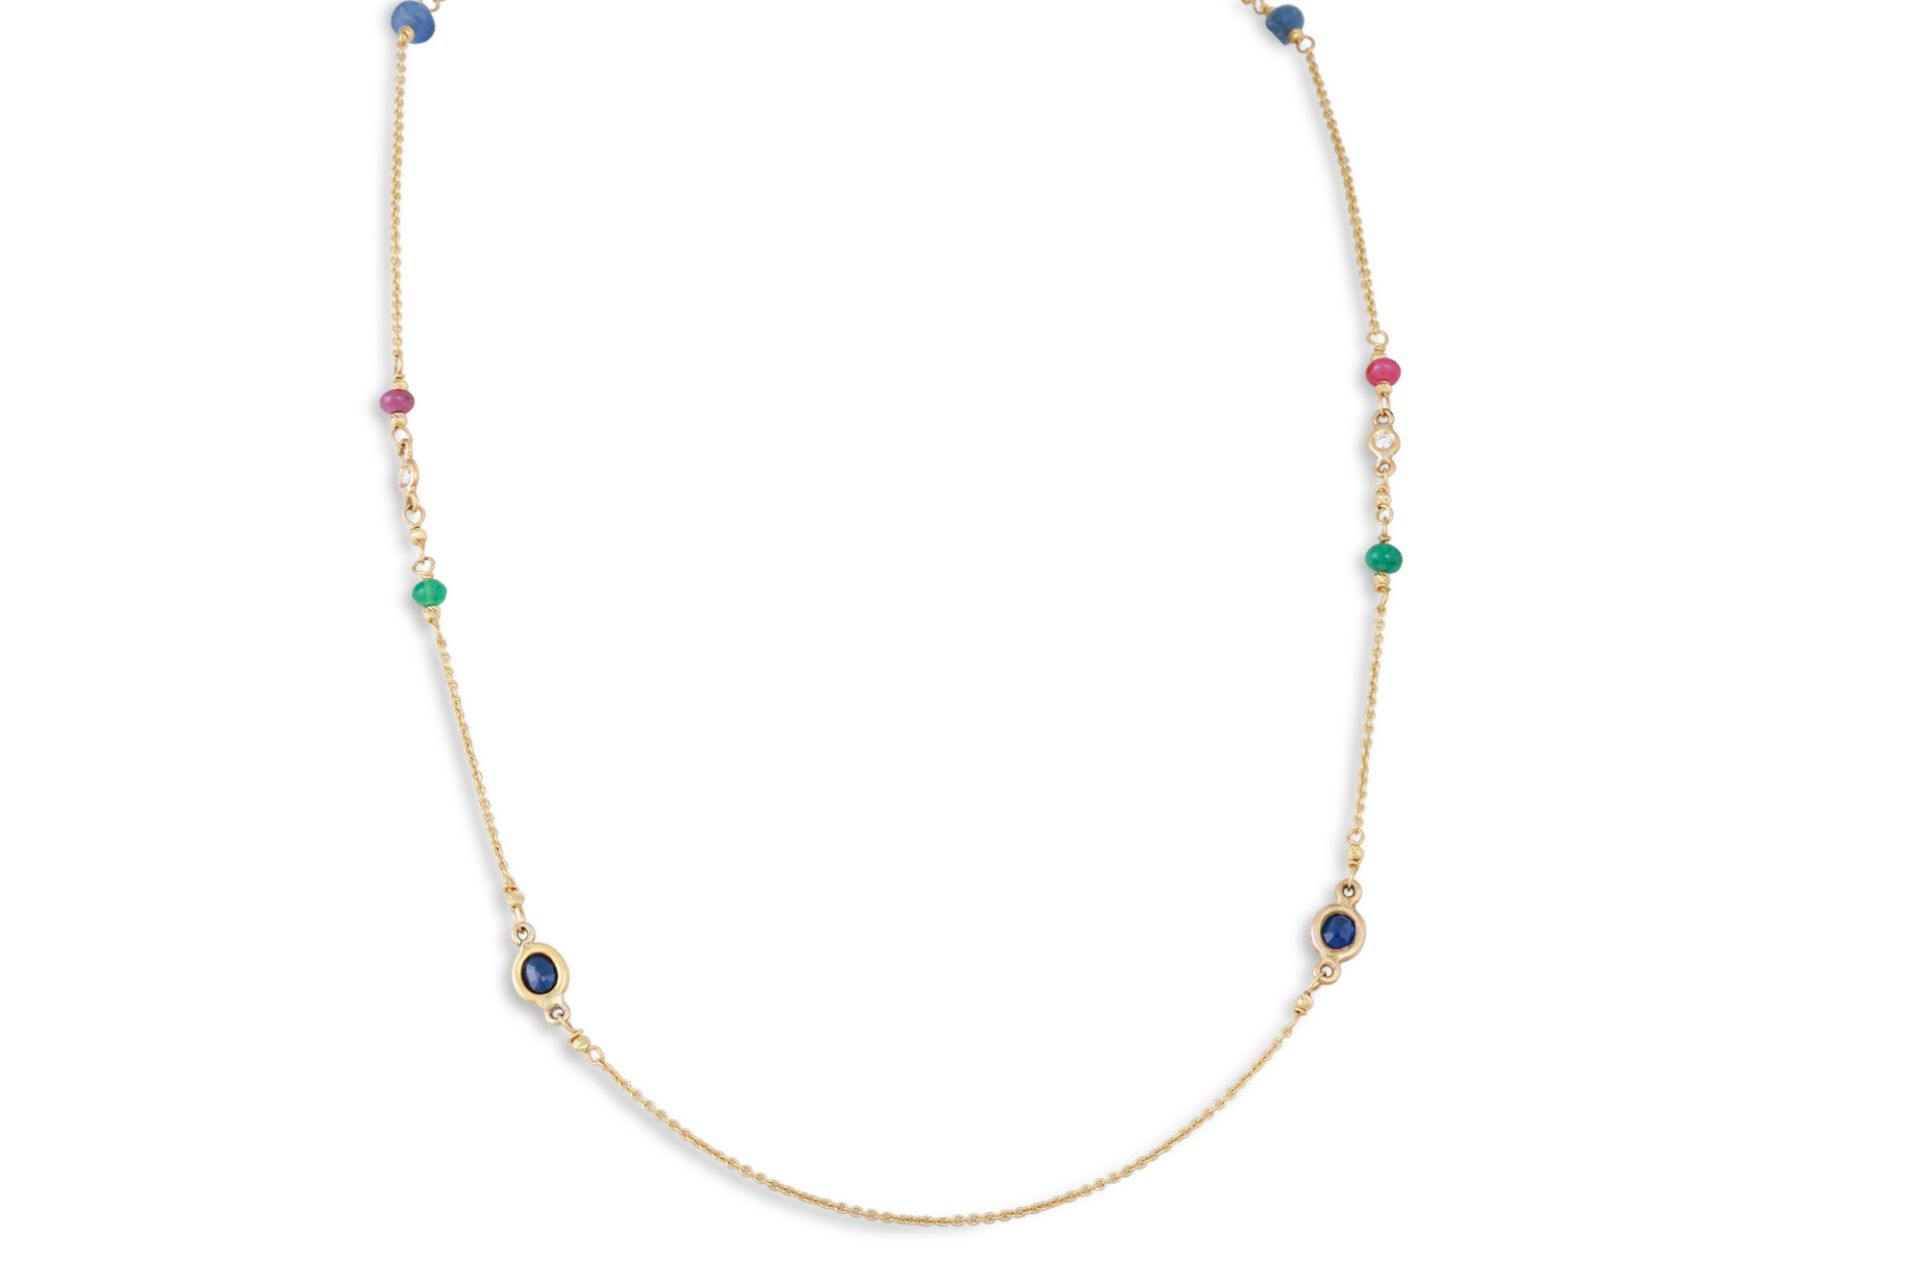 AN EMERALD, RUBY, SAPPHIRE AND DIAMOND SET NECKLACE, the beaded and faceted stones linked by 18ct